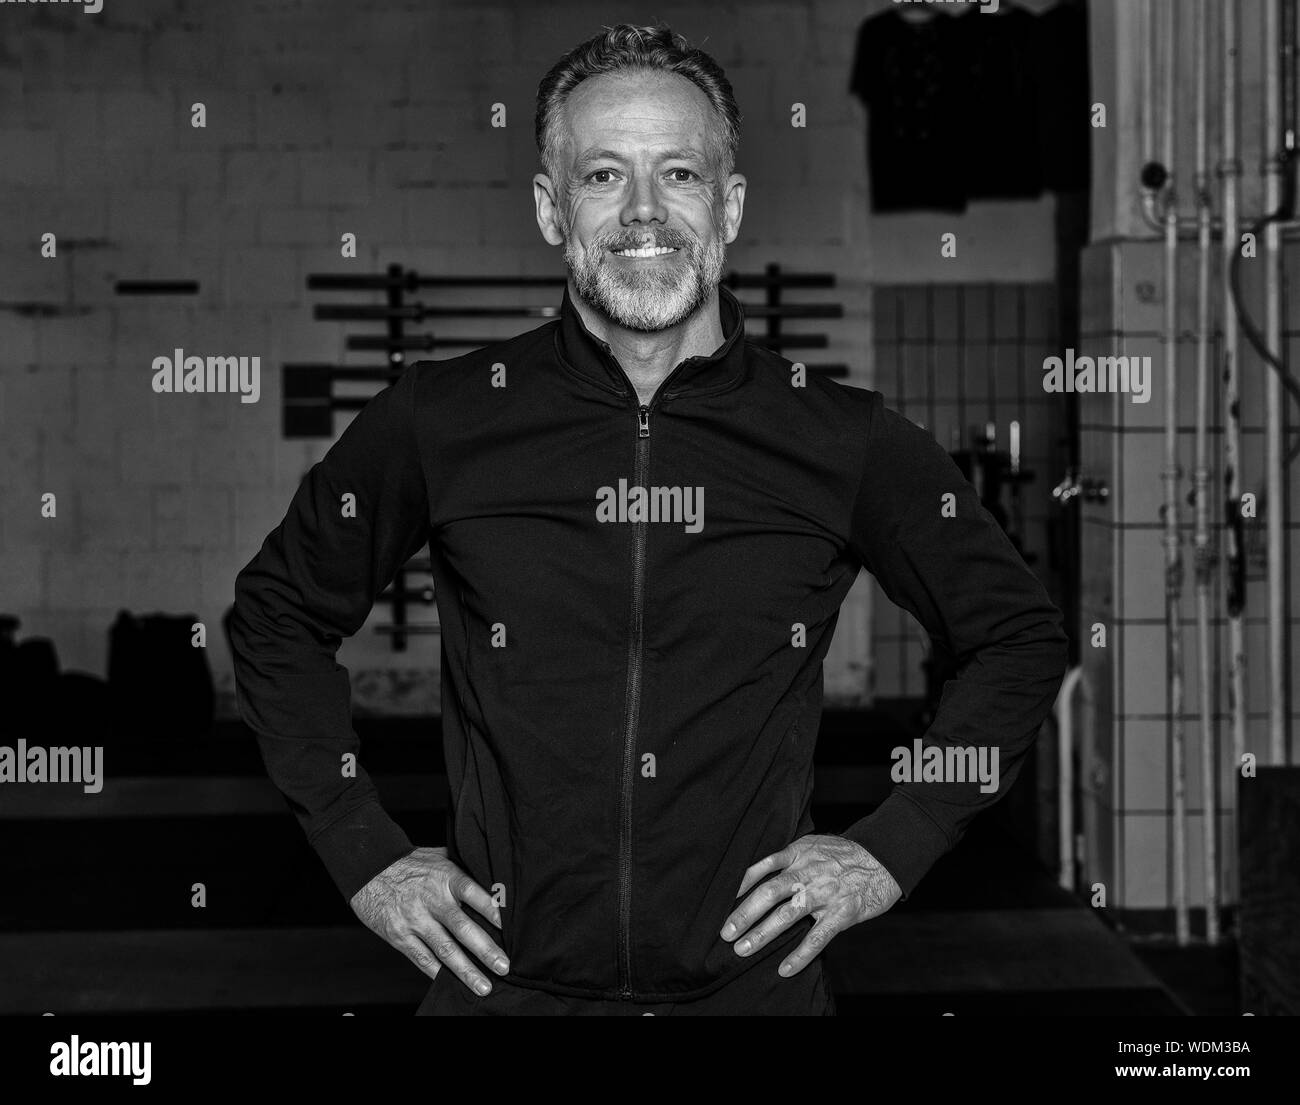 Portrait of an attractive fit middle aged man in a fitness studio. Bearded grey haired man with black sweatshirt jacket is looking into the camera. Stock Photo